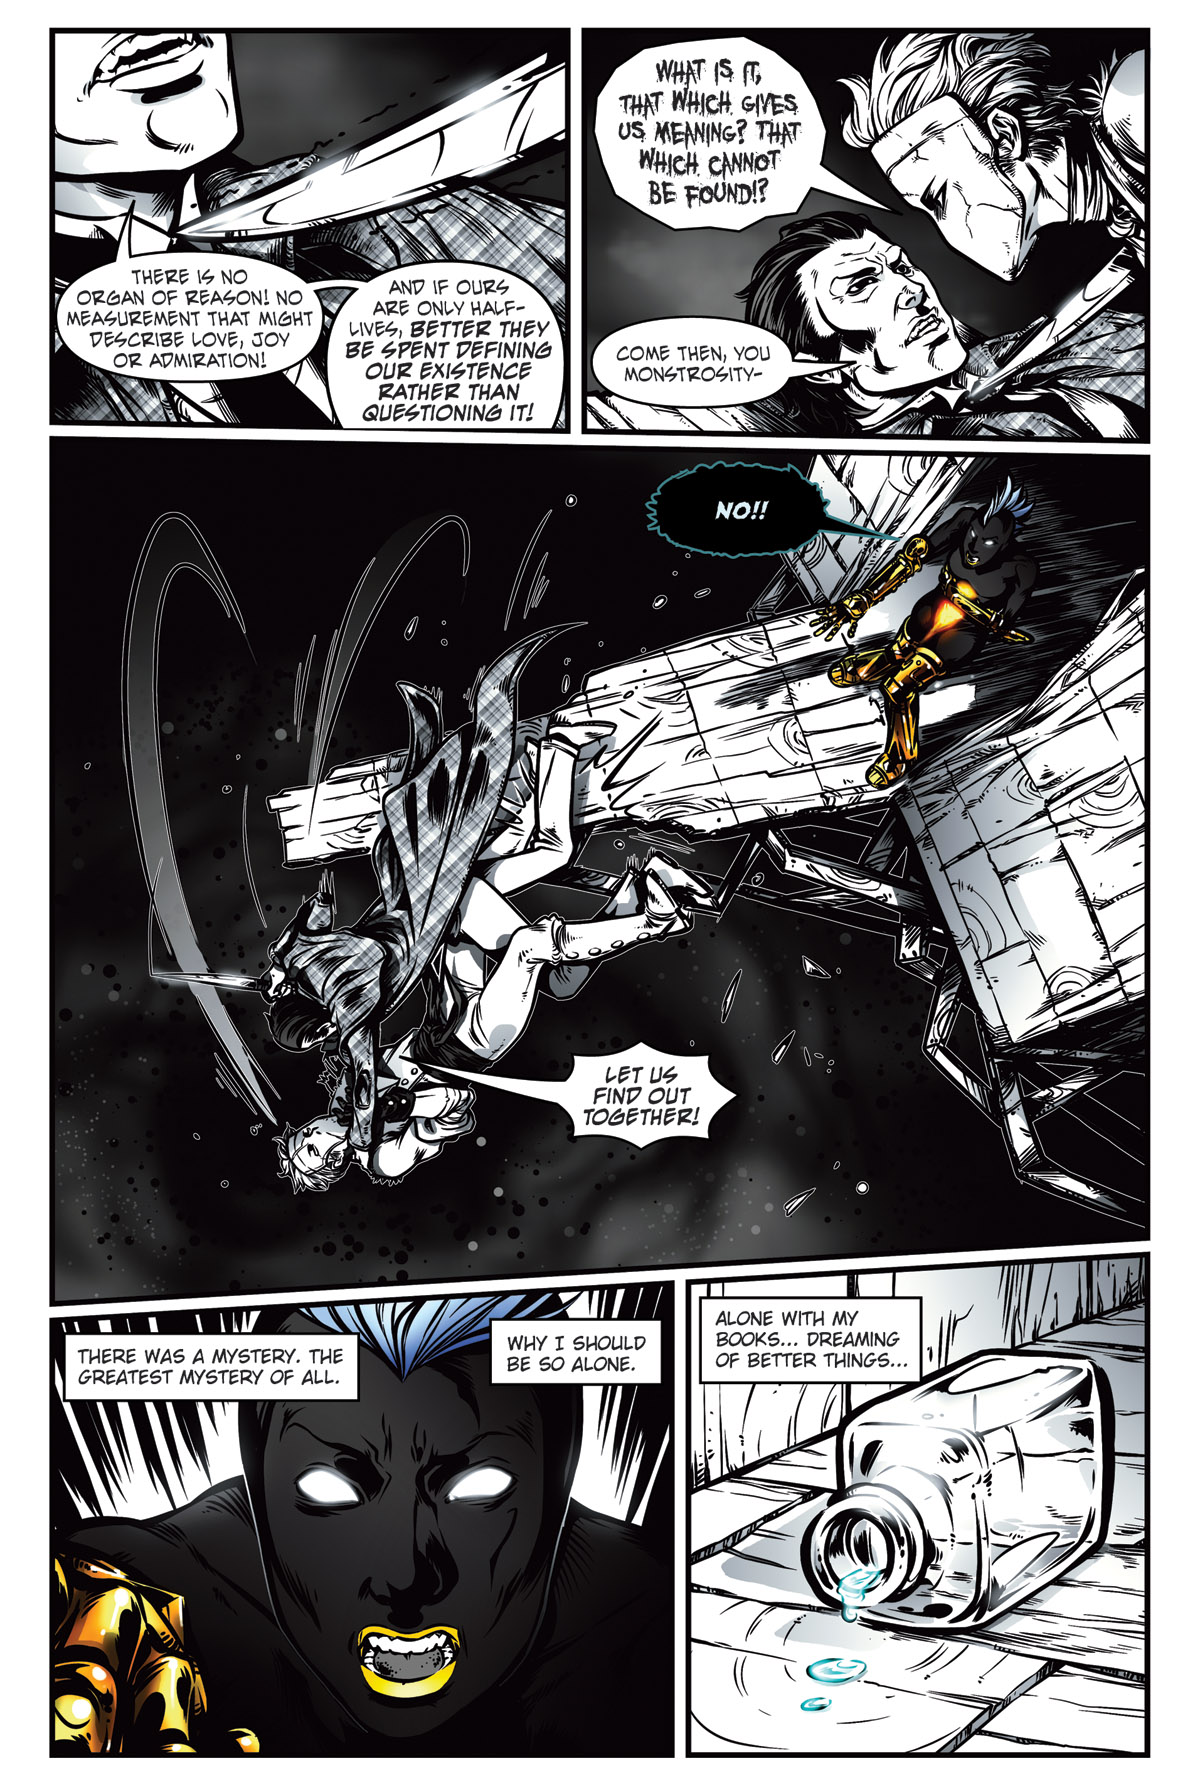 Afterlife Inc. | Elementary | Page 9